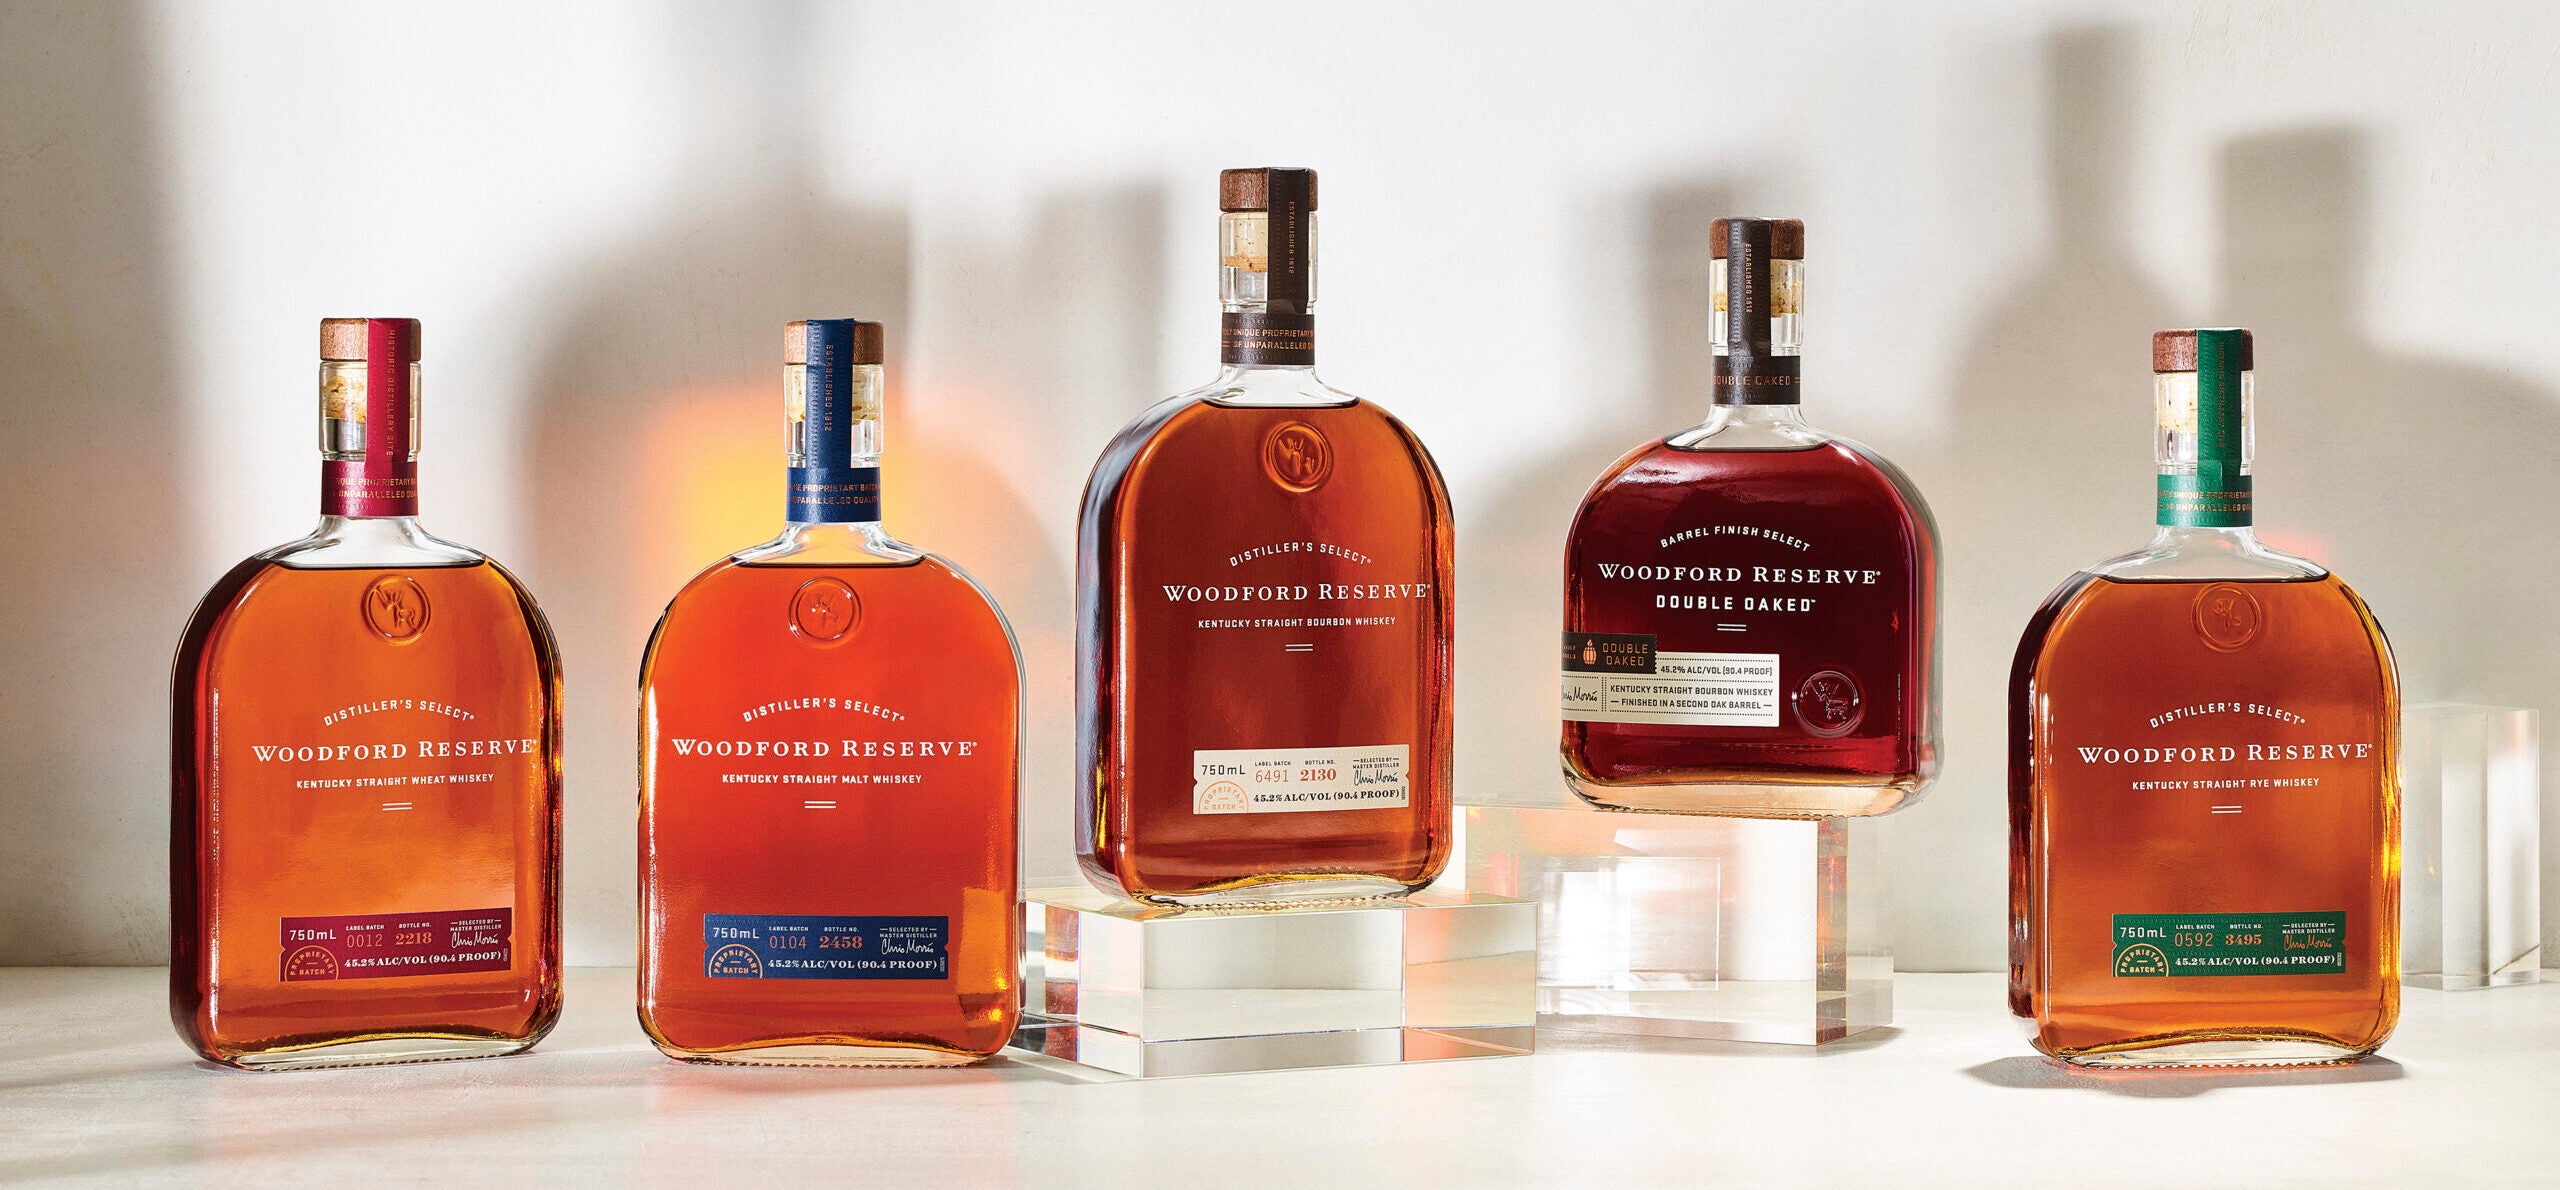 Display of Woodford Reserve bottles, including Woodford Reserve Kentucky Straight Wheat Whiskey, Kentucky Straight Malt Whiskey, Kentucky Straight Bourbon Whiskey, Double Oaked and Kentucky Straight Rye Whiskey.